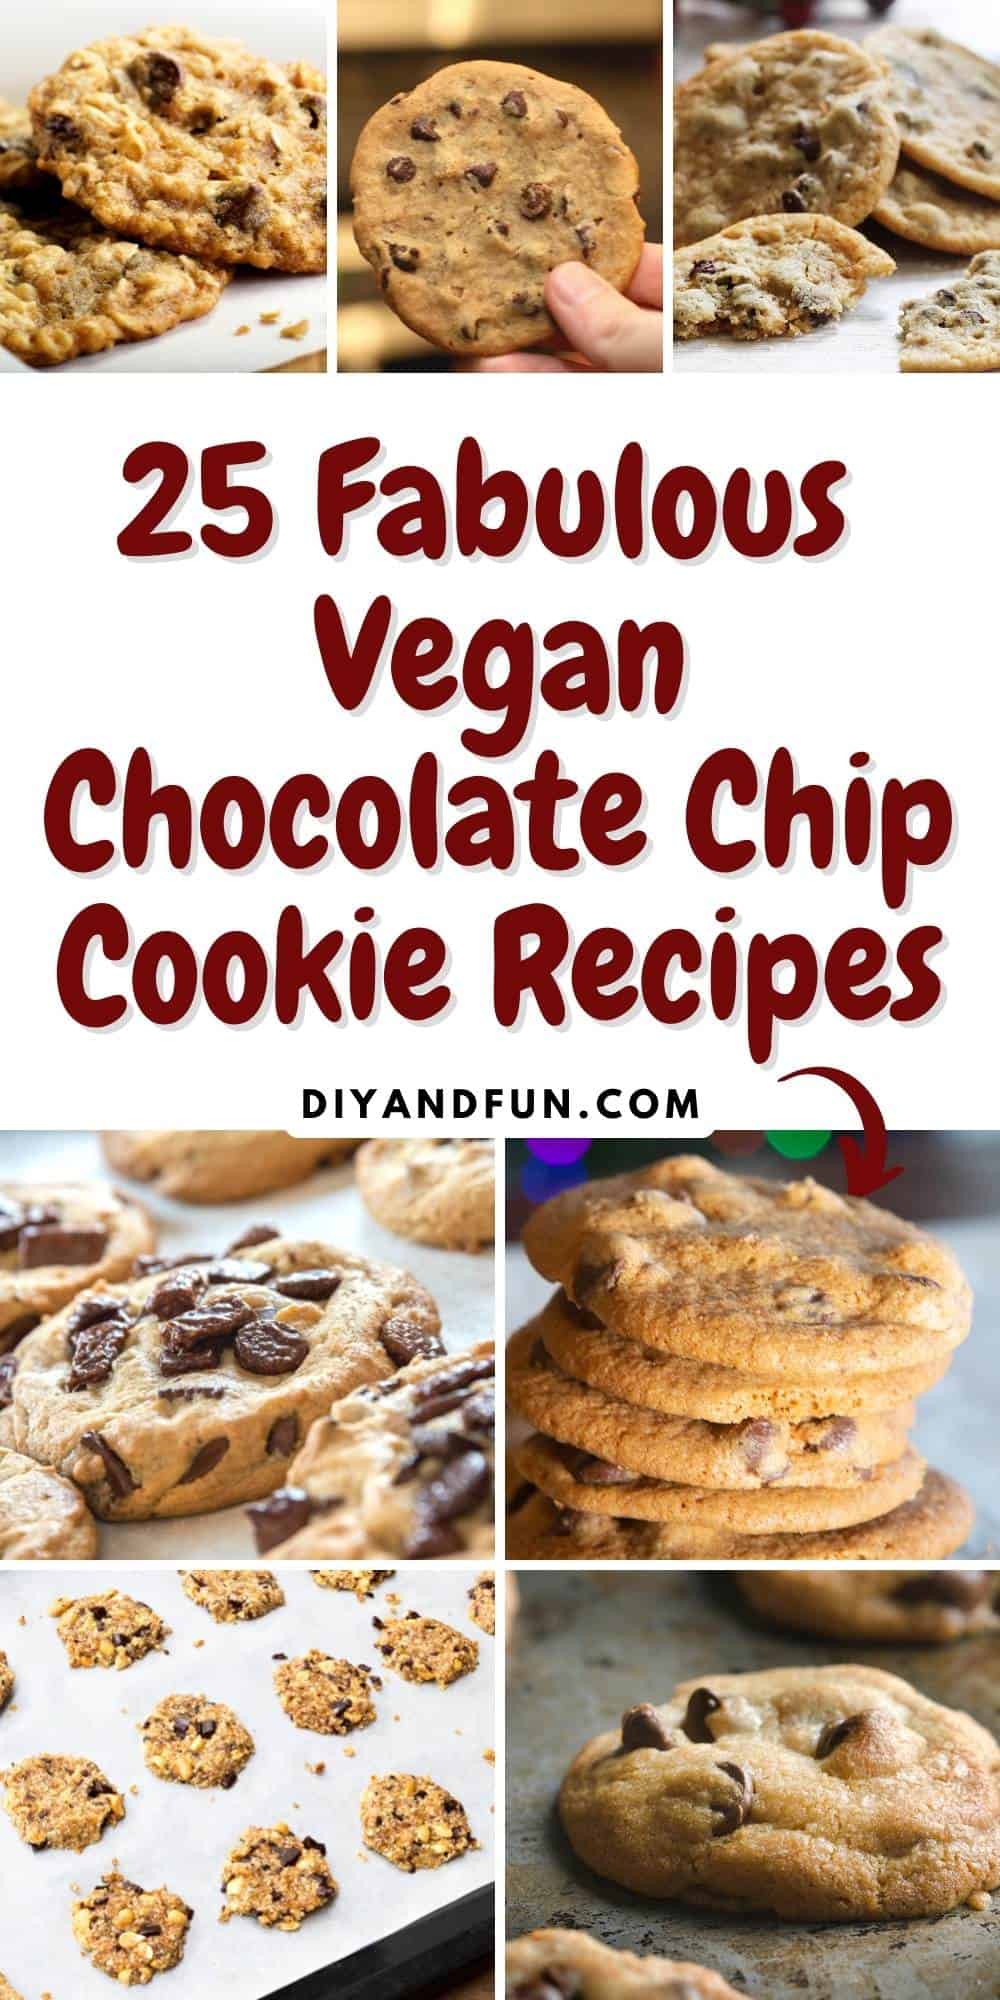 25 Vegan Chocolate Chip Cookie Recipes, included some of the best recipes such as gluten free, paleo, keto, and no added sugar.